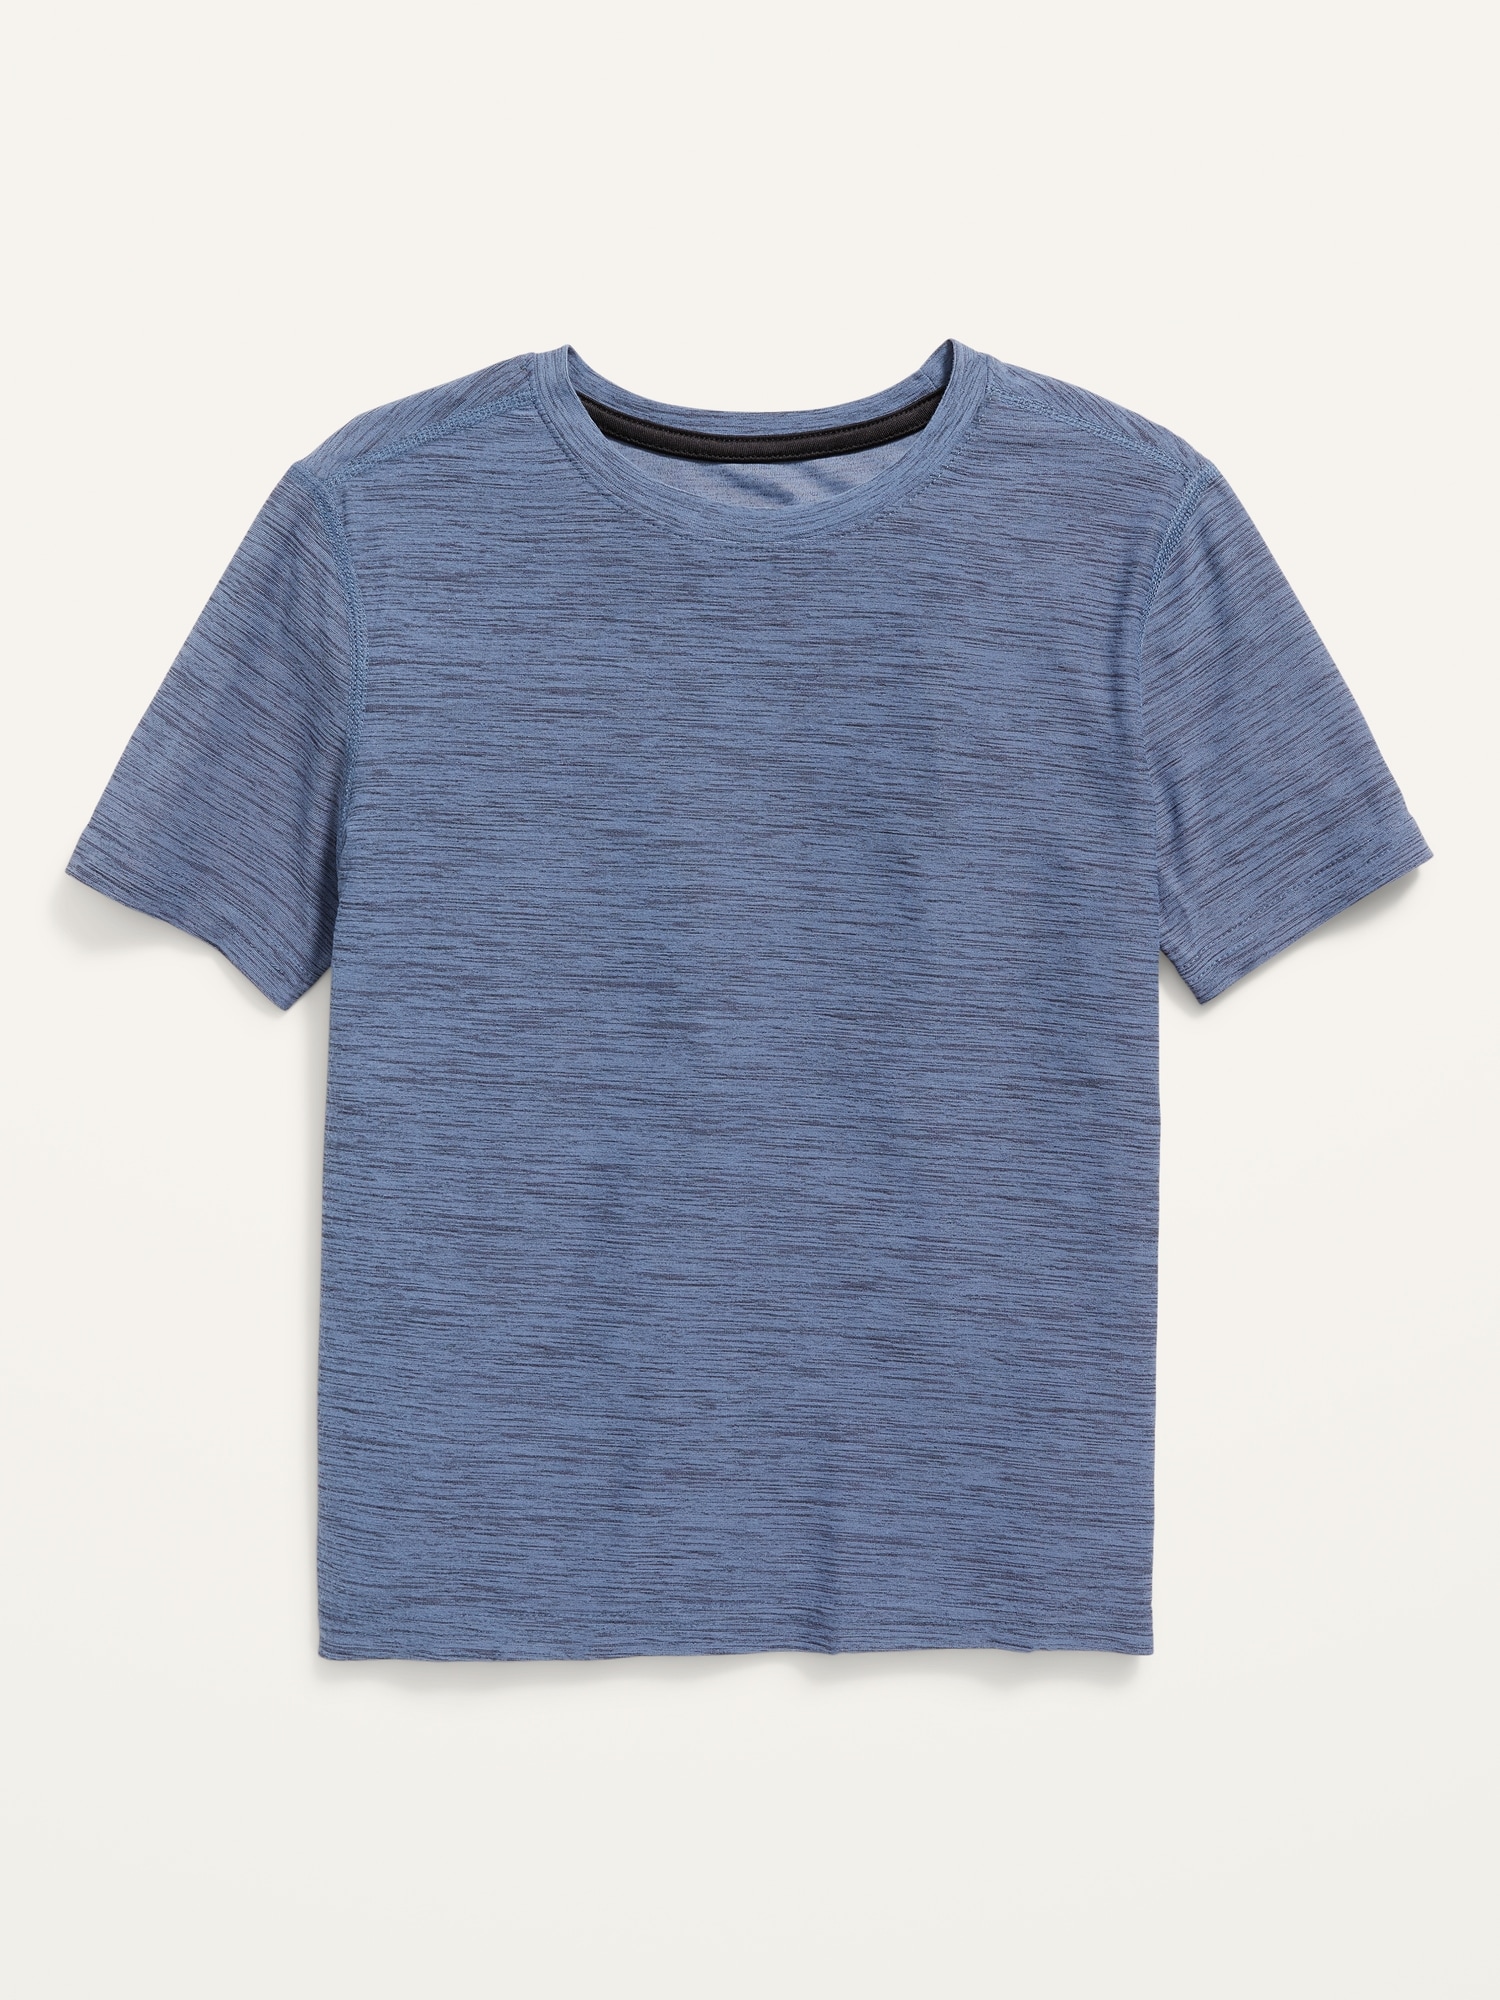 Ultra-Soft Breathe On T-Shirt for Boys | Old Navy